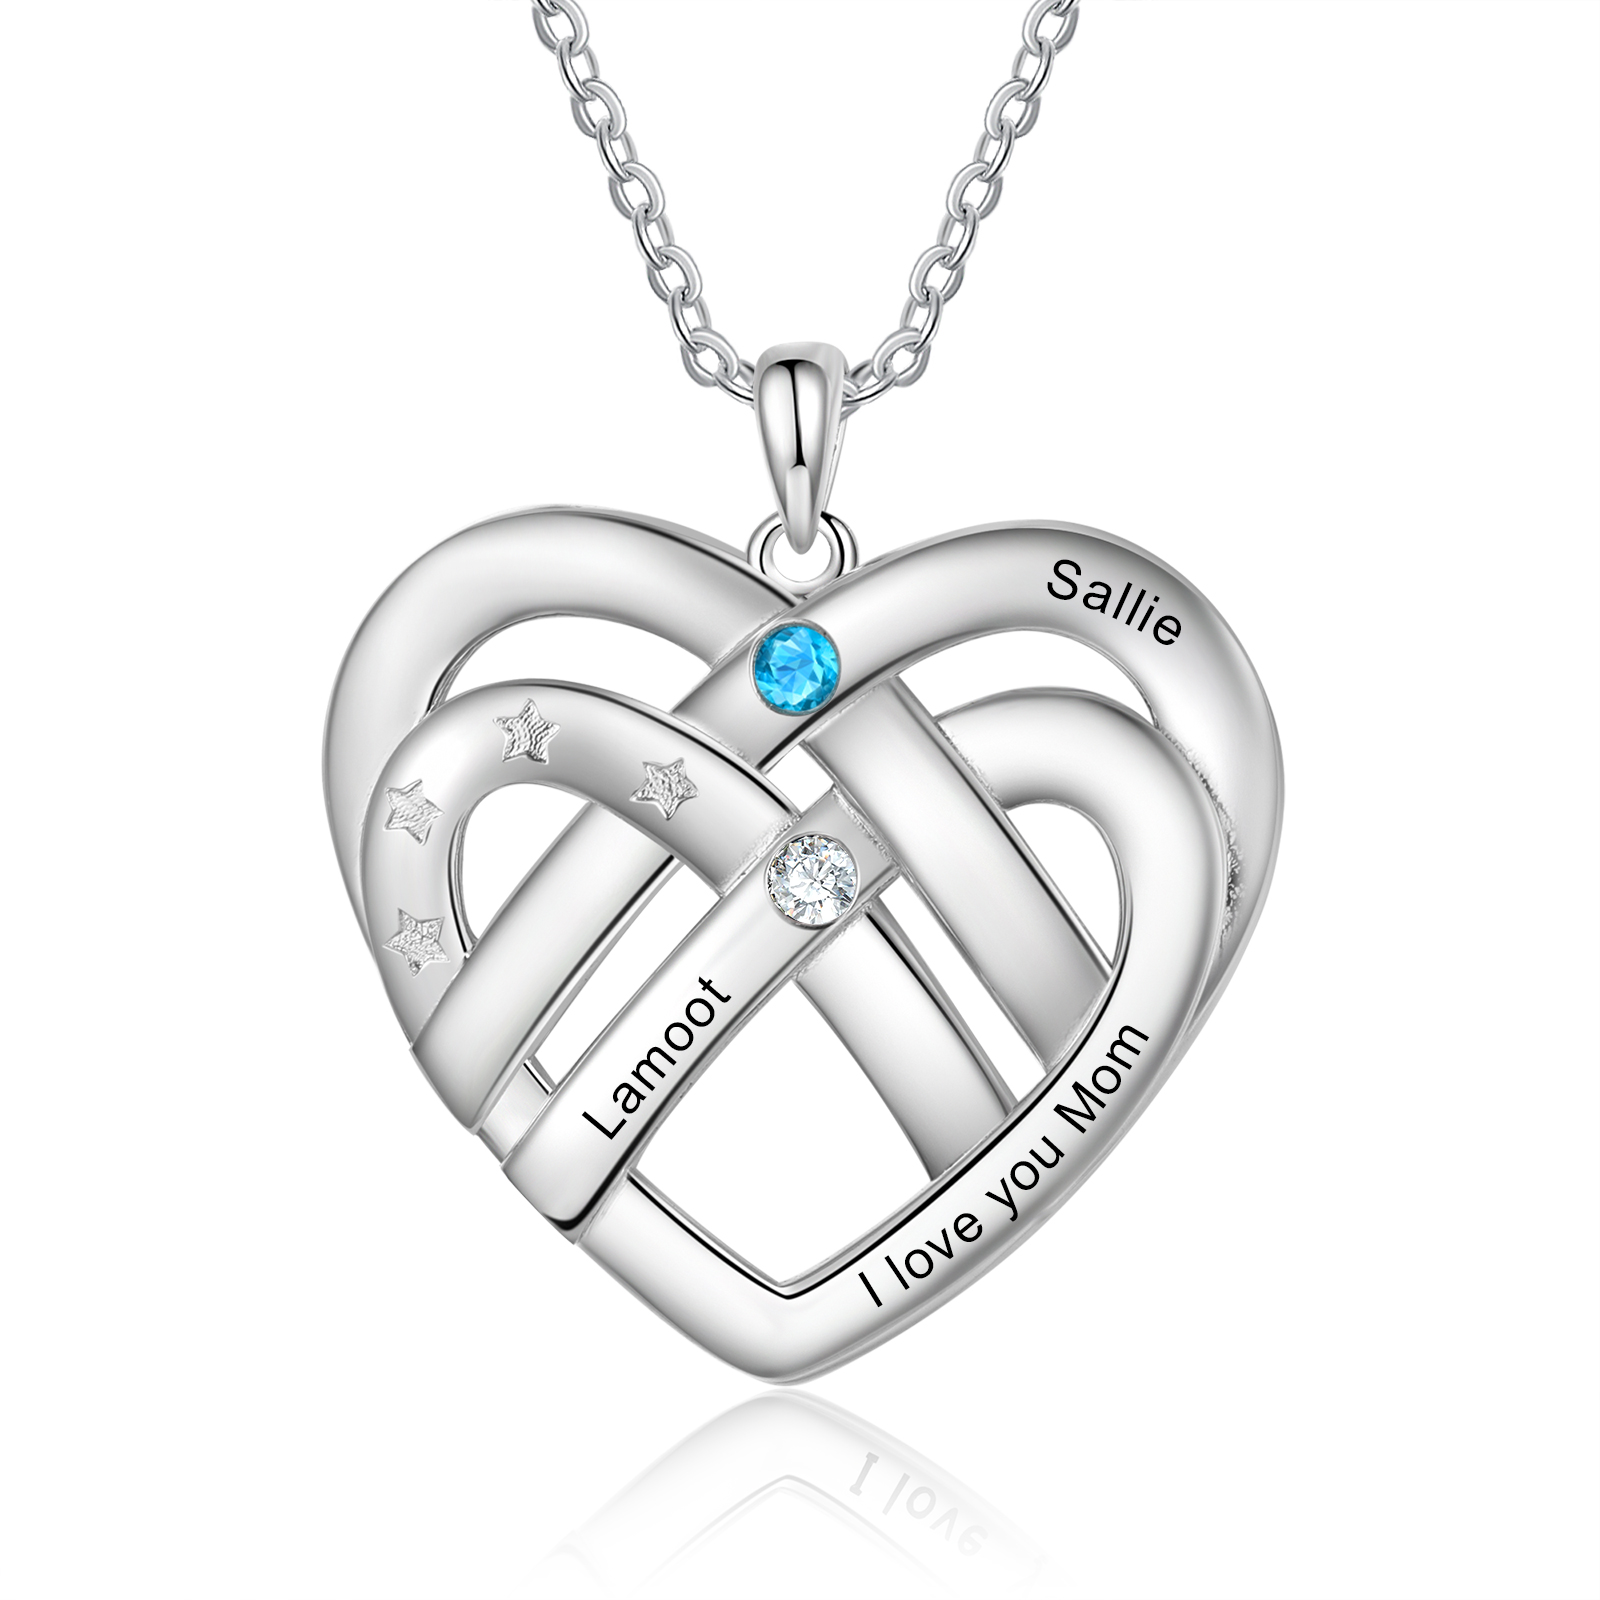 2 Names - Personalized Double Layer Heart Necklace with Custom Name an